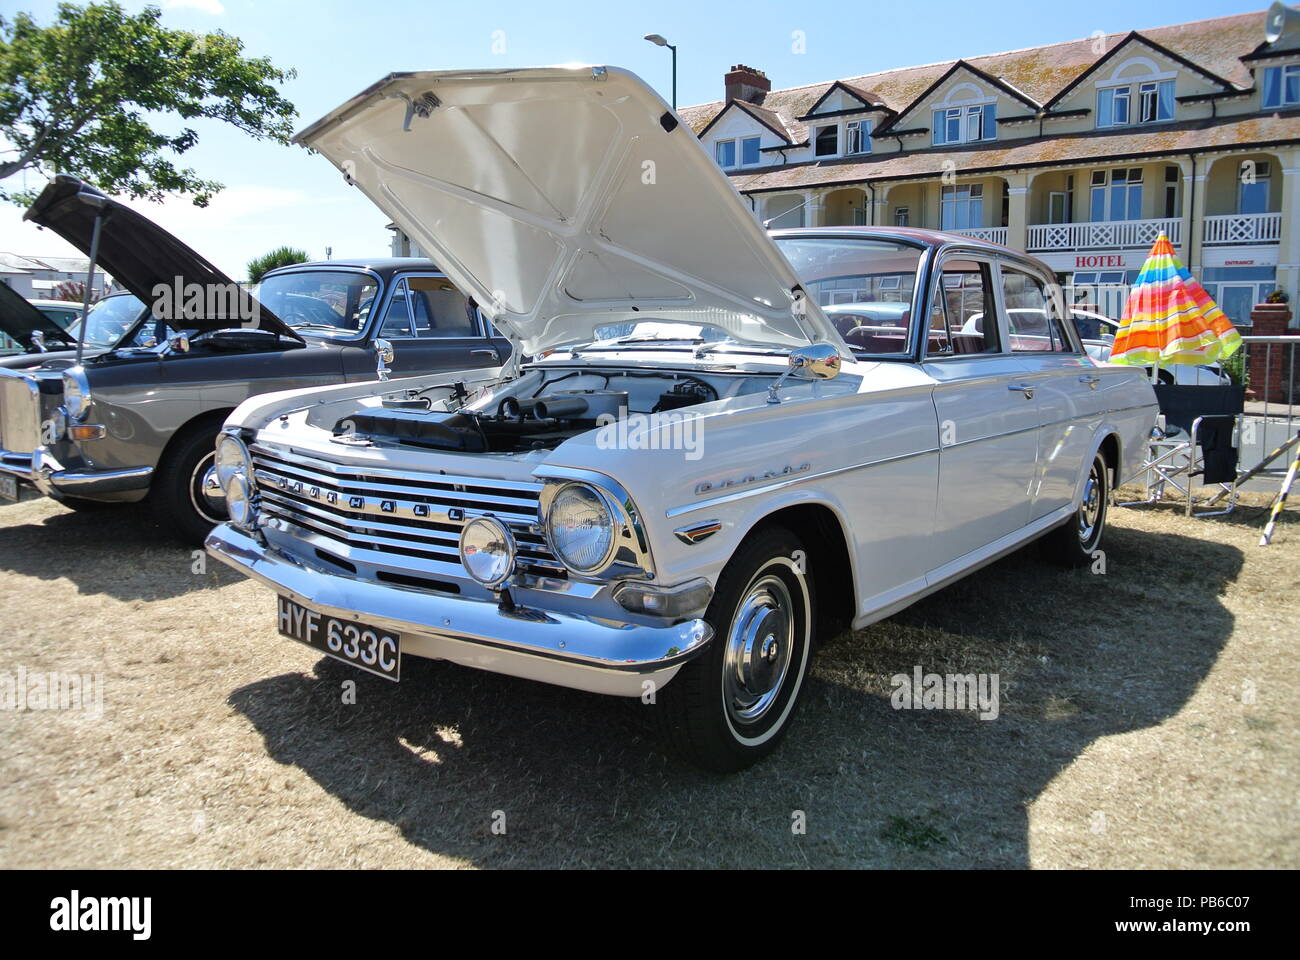 Vauxhall Cresta parked up on display at the English Riviera classic car show, Paignton, Devon, England, UK Stock Photo